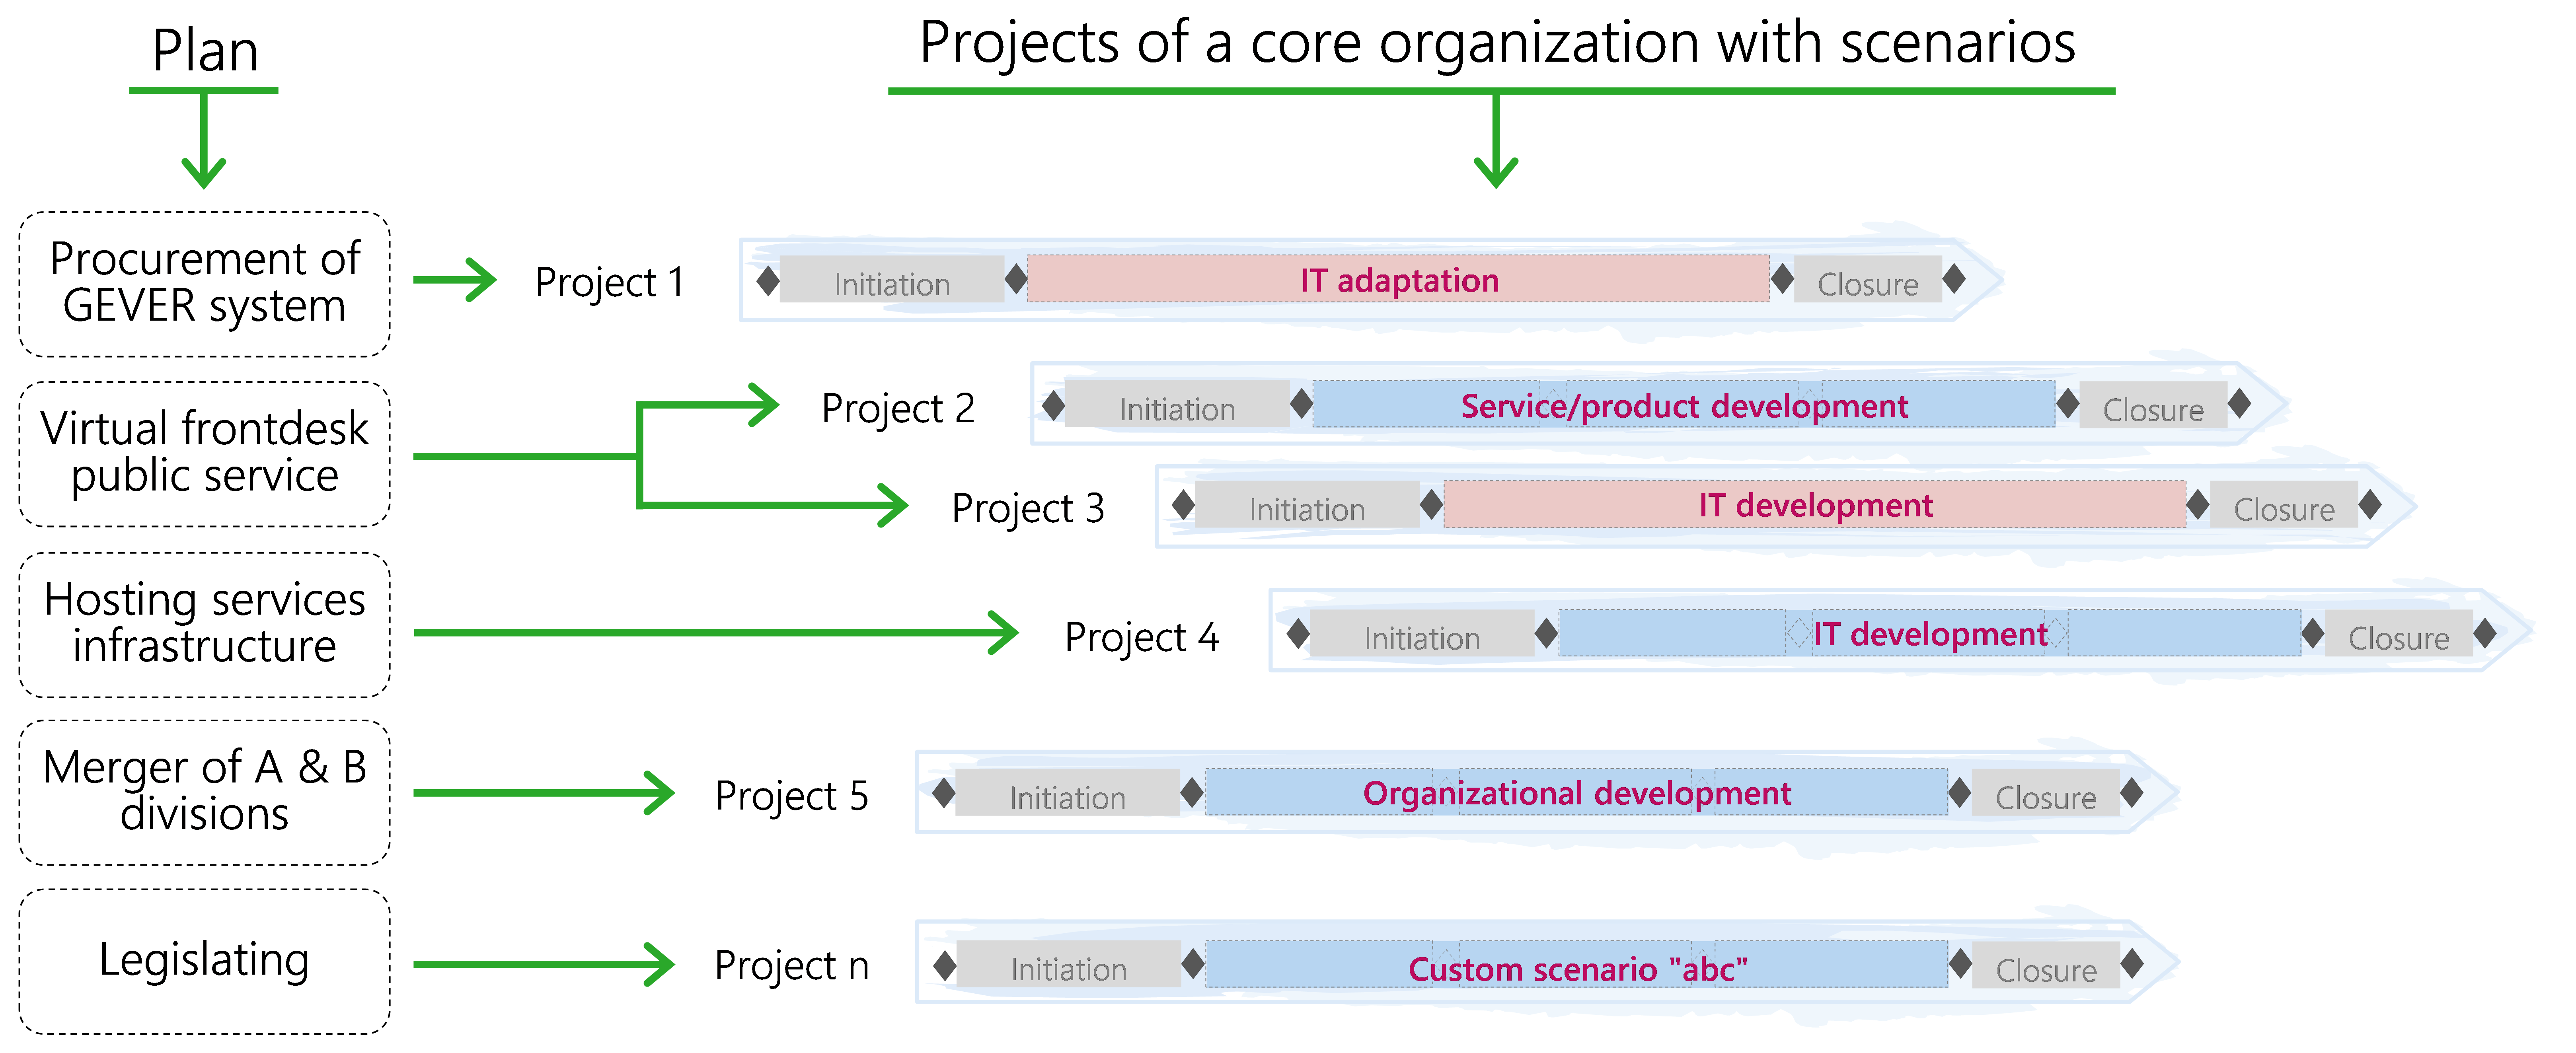 Figure 6: Projects of a core organization with scenarios